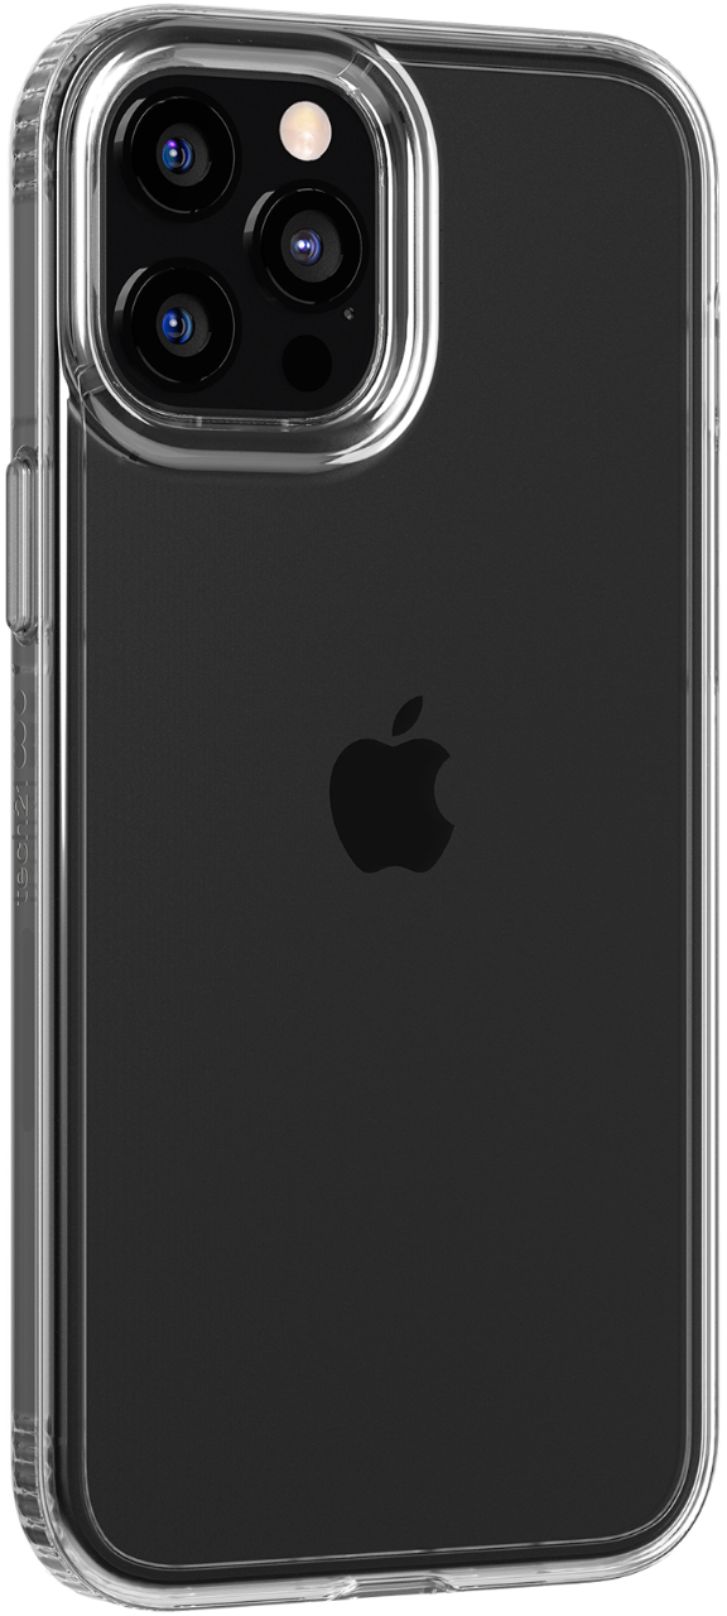 Tech21 Evo Clear Case For Apple Iphone 12 Pro Max Clear bbr Best Buy